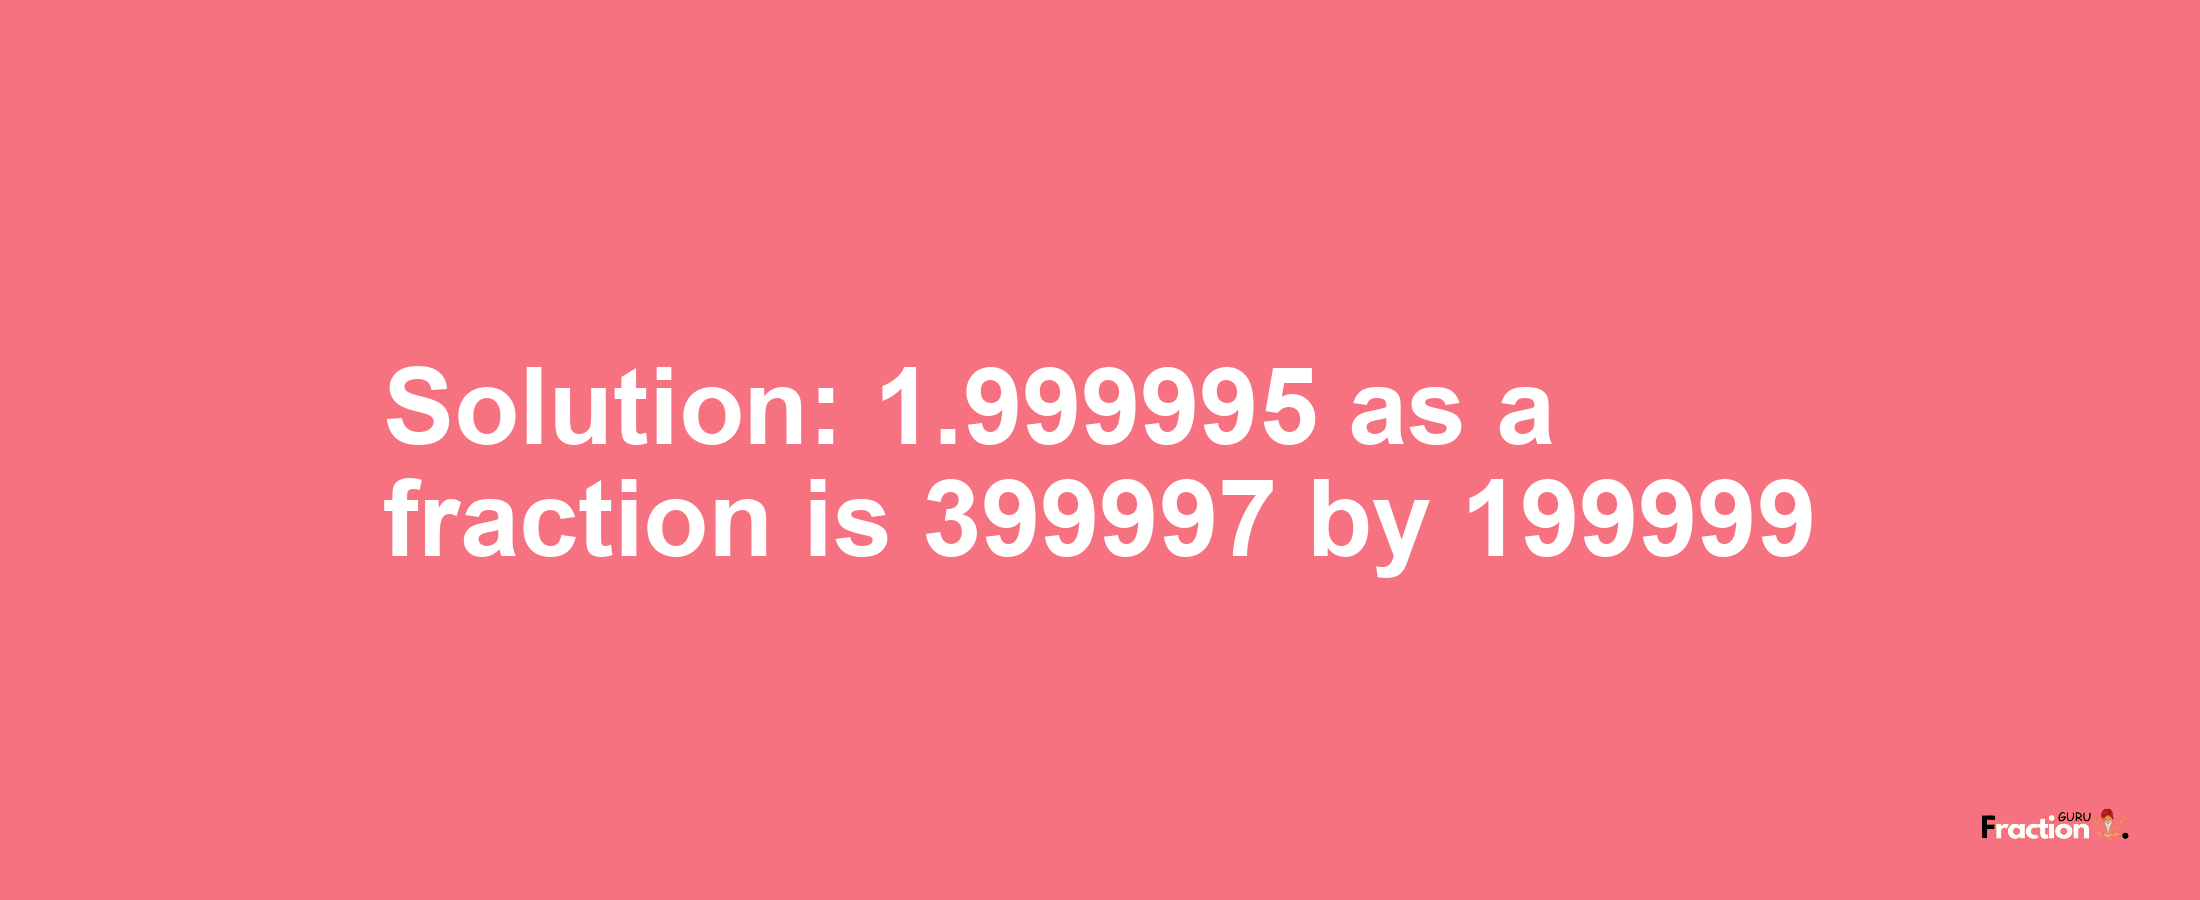 Solution:1.999995 as a fraction is 399997/199999